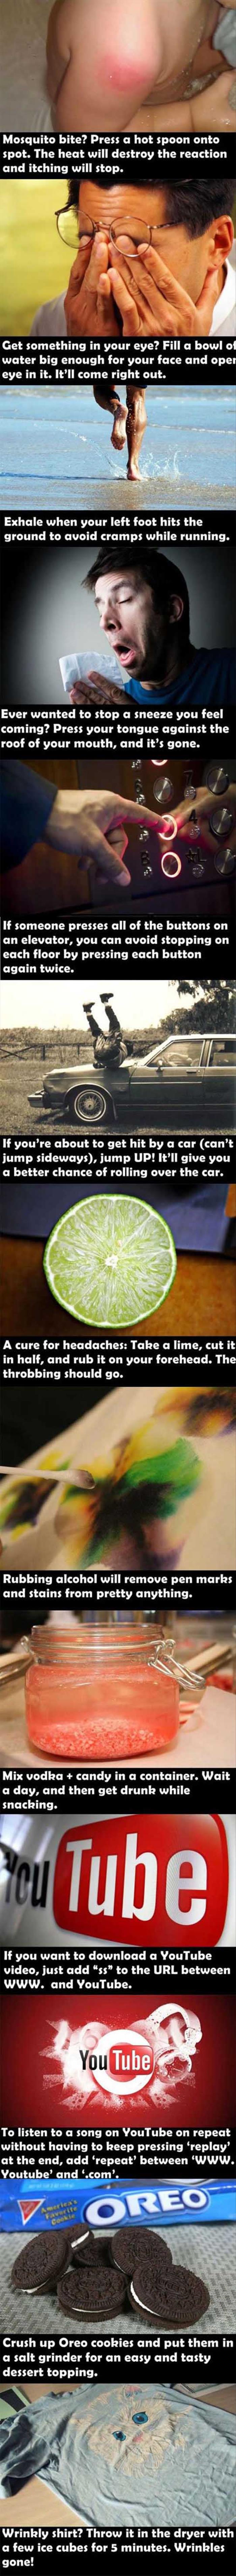 life hacks pictures